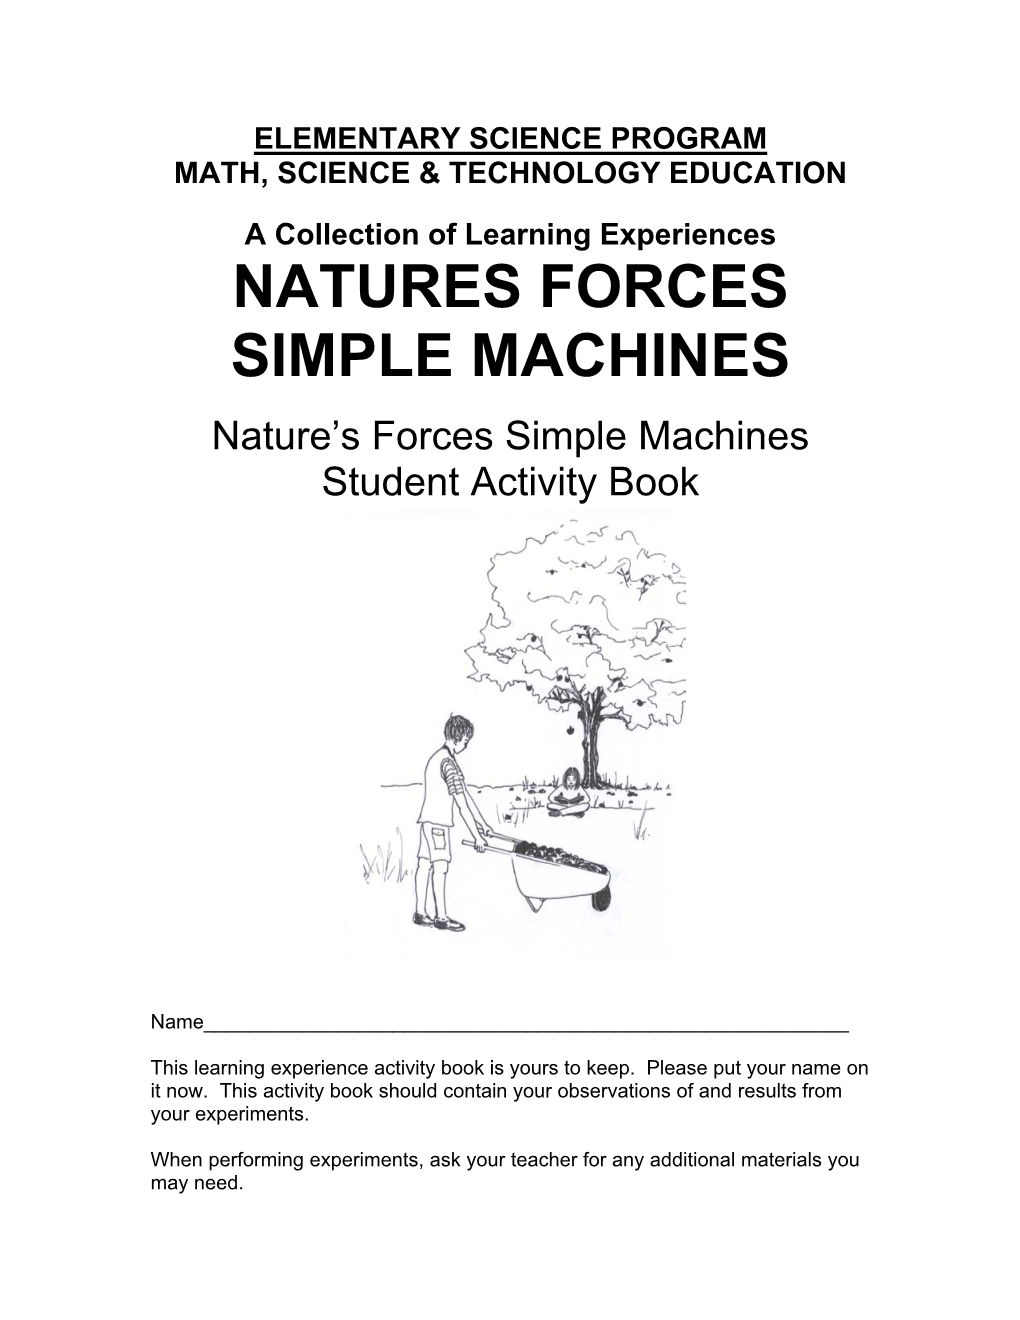 Natures Forces Simple Machines